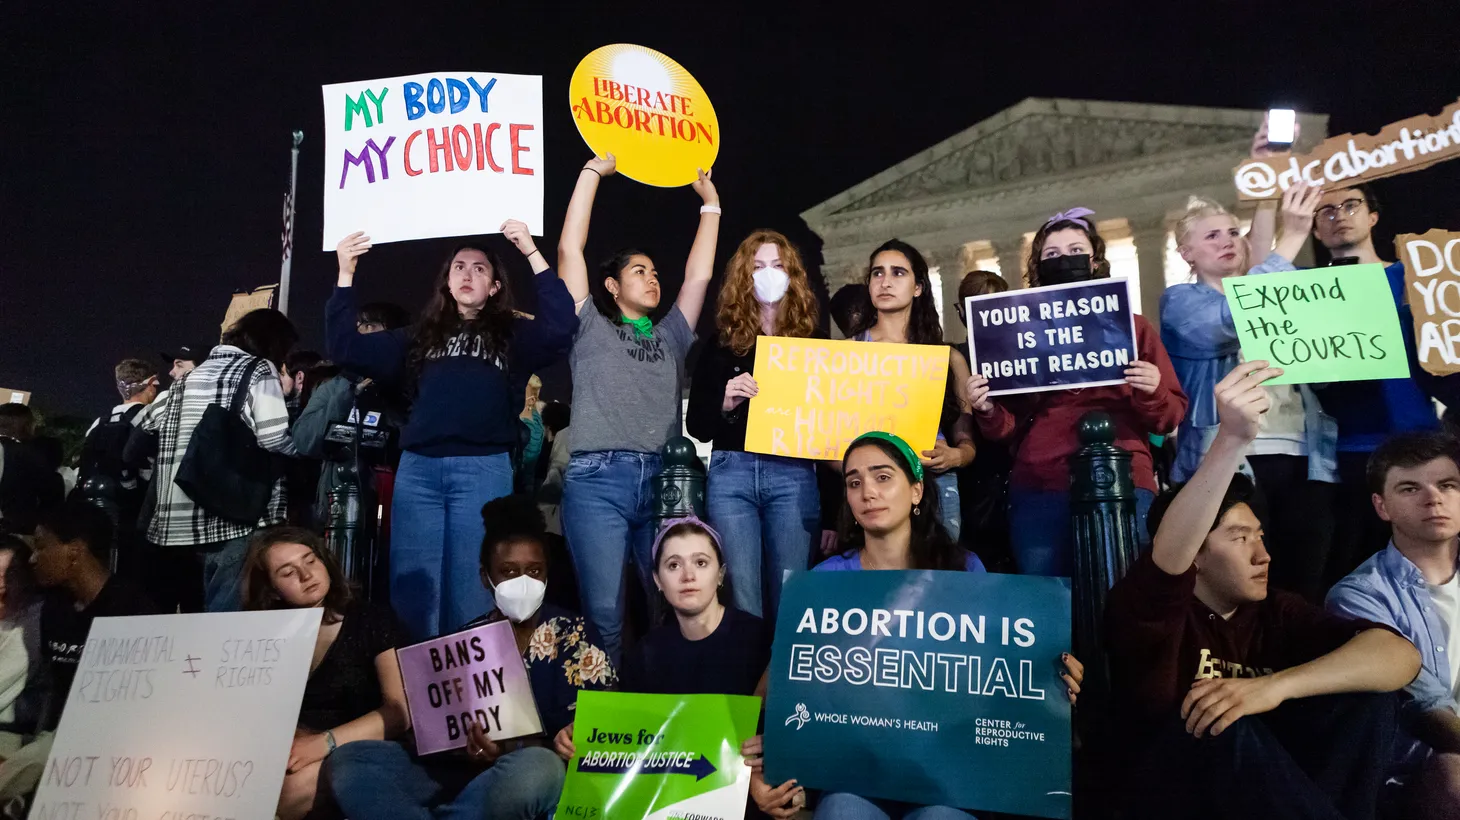 Pro-choice activists rally at the Supreme Court just hours after Politico reported on the high court’s draft opinion of overturning Roe v. Wade, May 2, 2022.